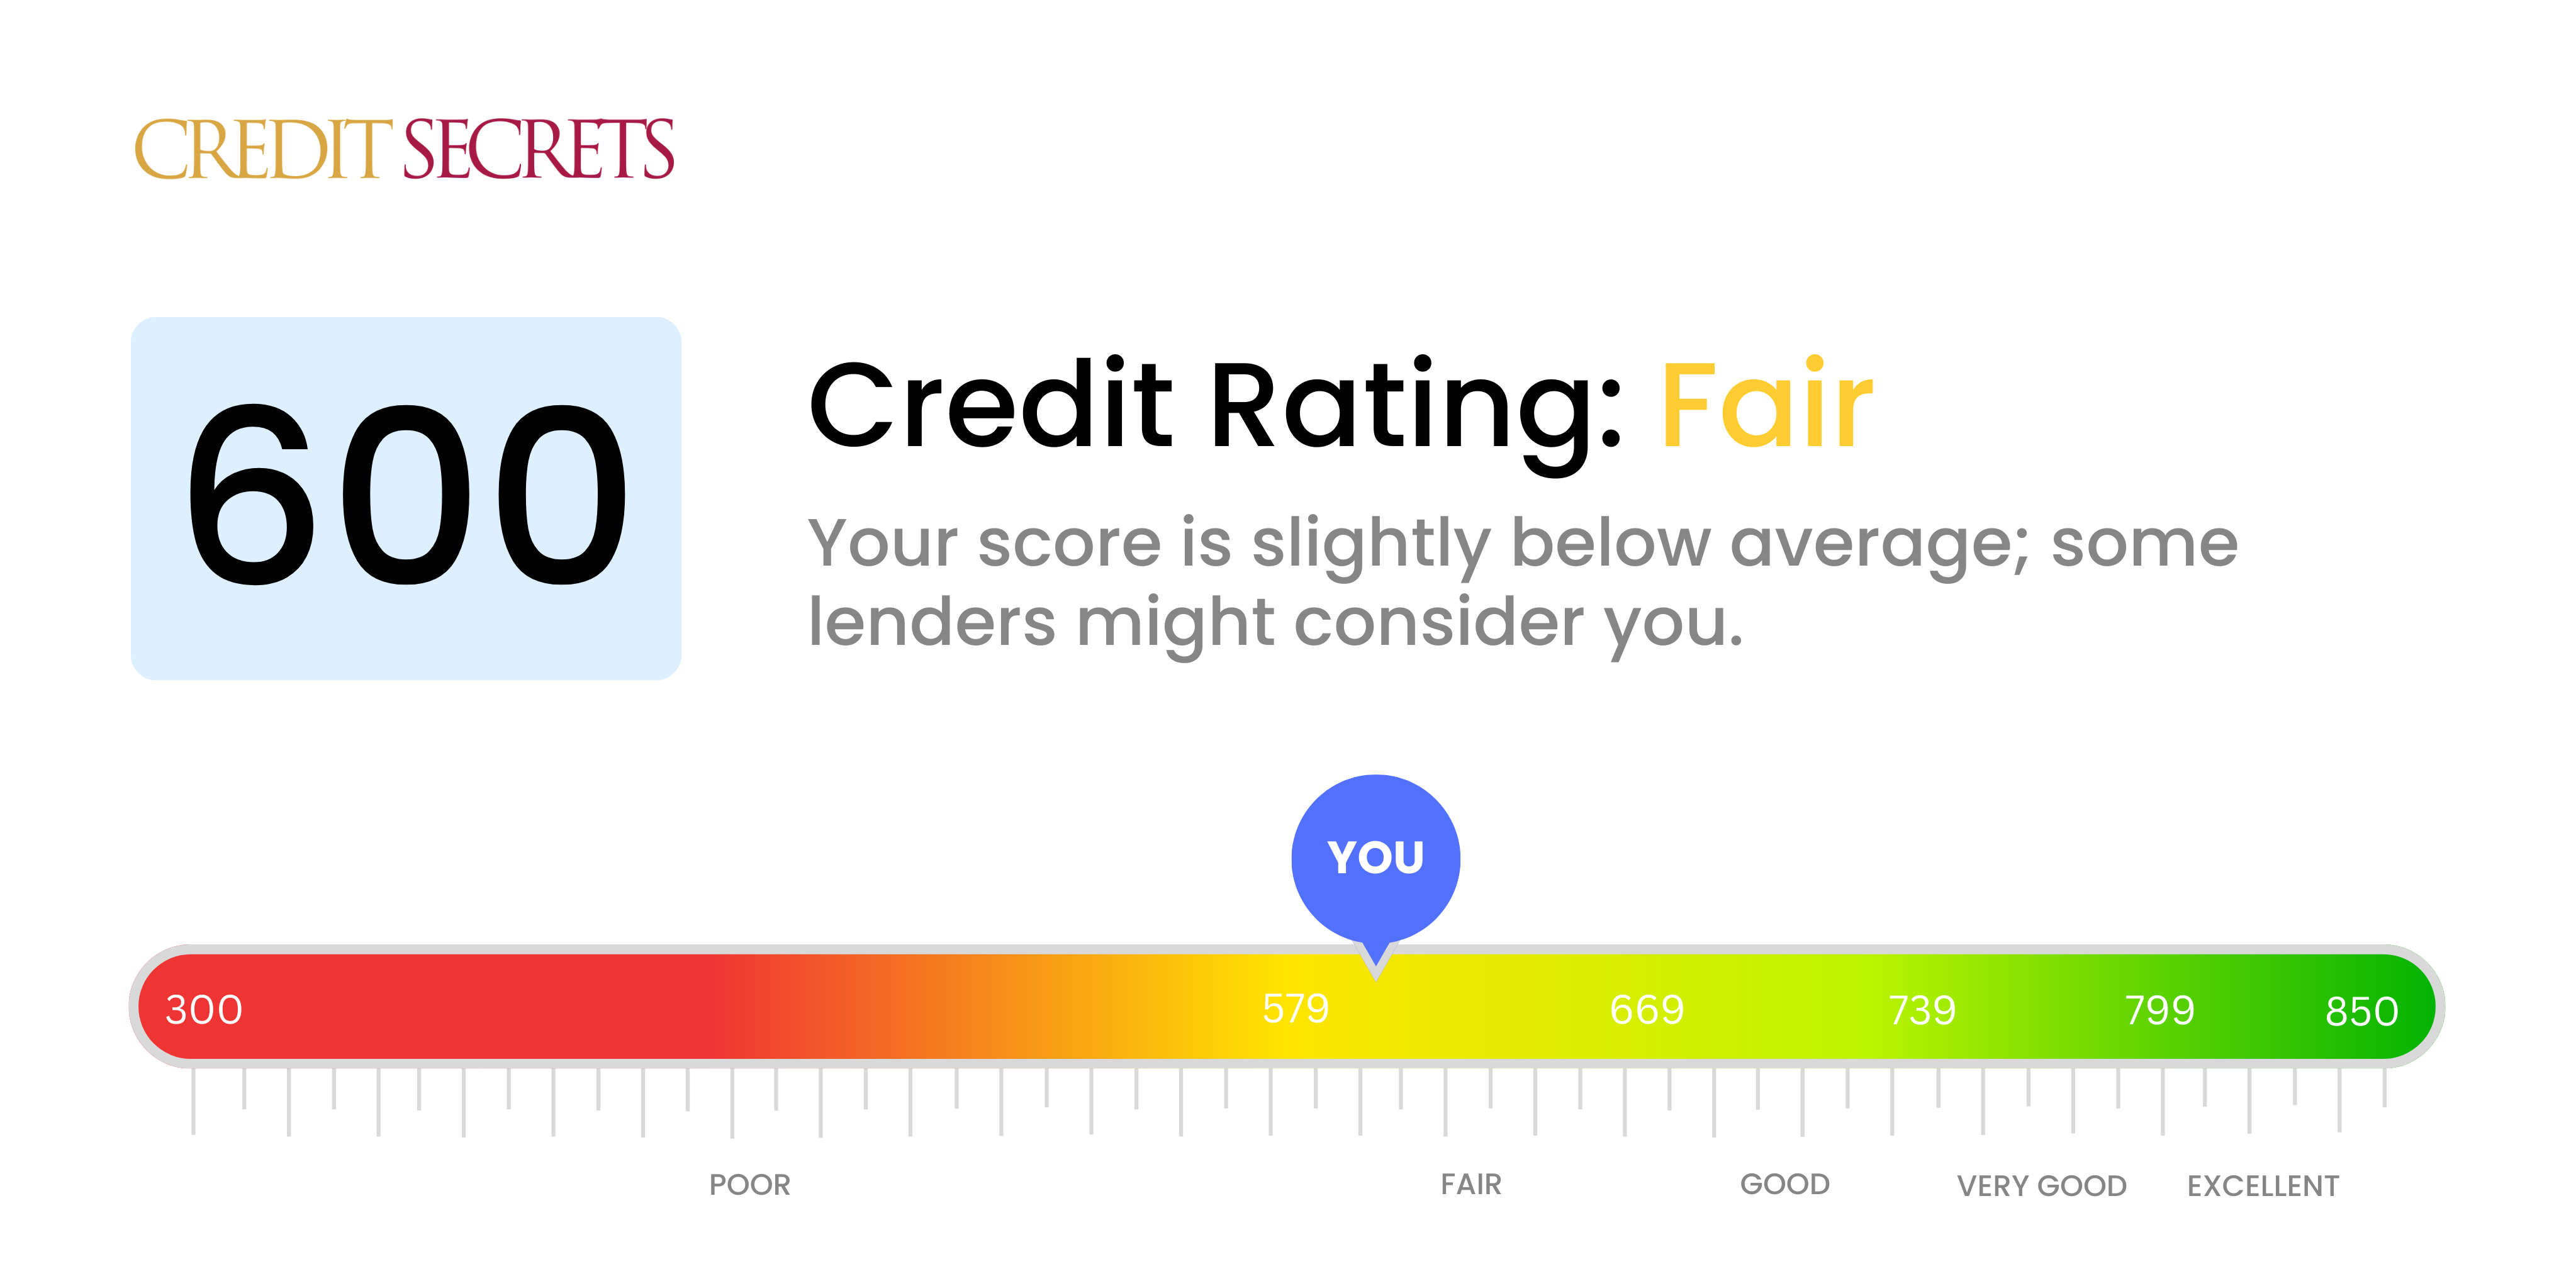 Is 600 a good credit score?